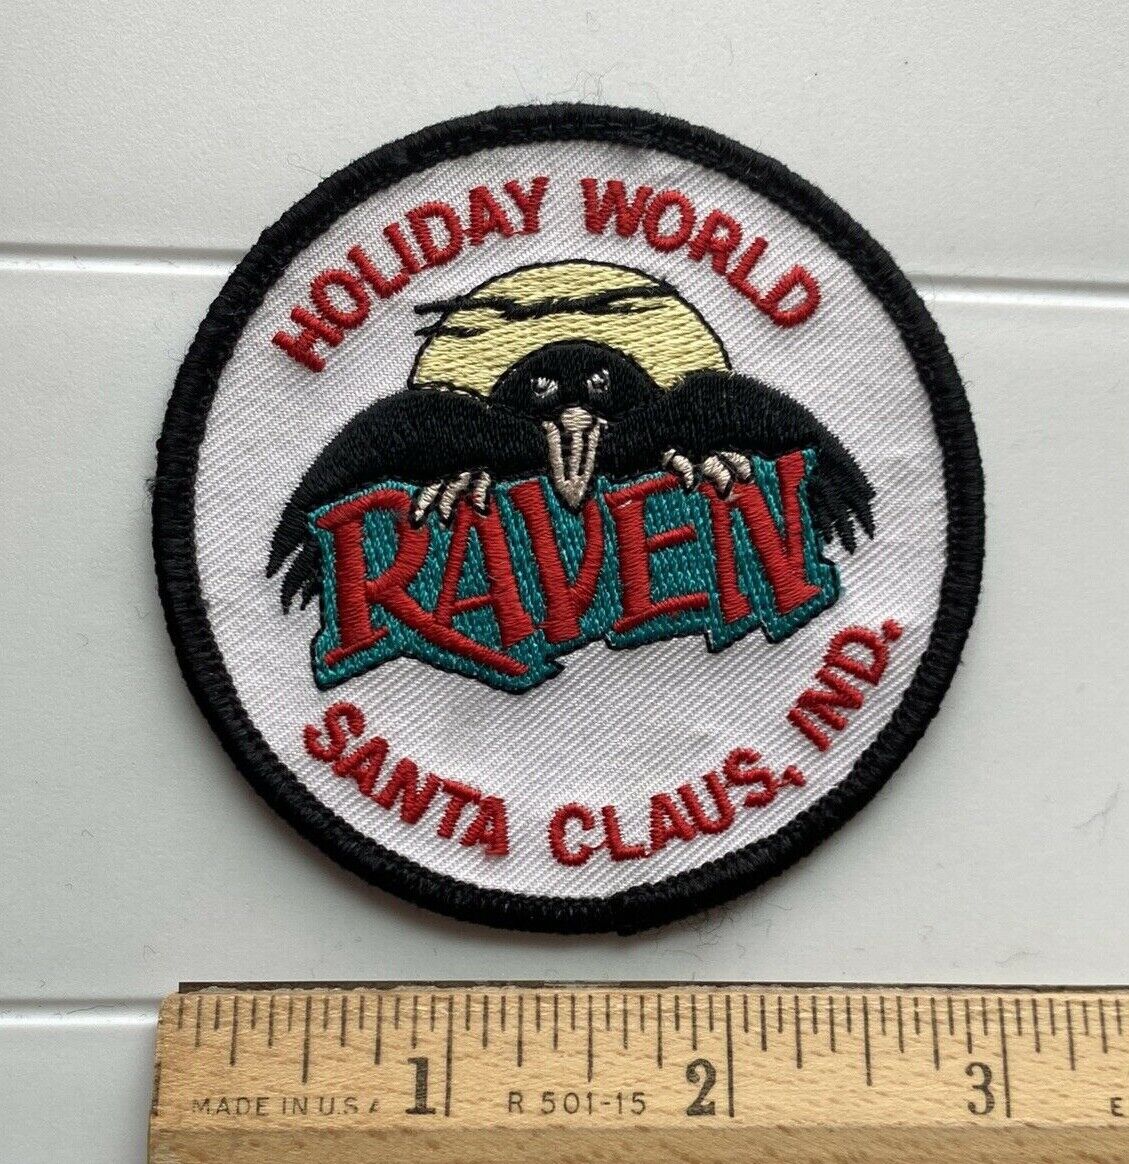 Holiday World The Raven Wooden Roller Coaster Park Ride Souvenir Patch Badge